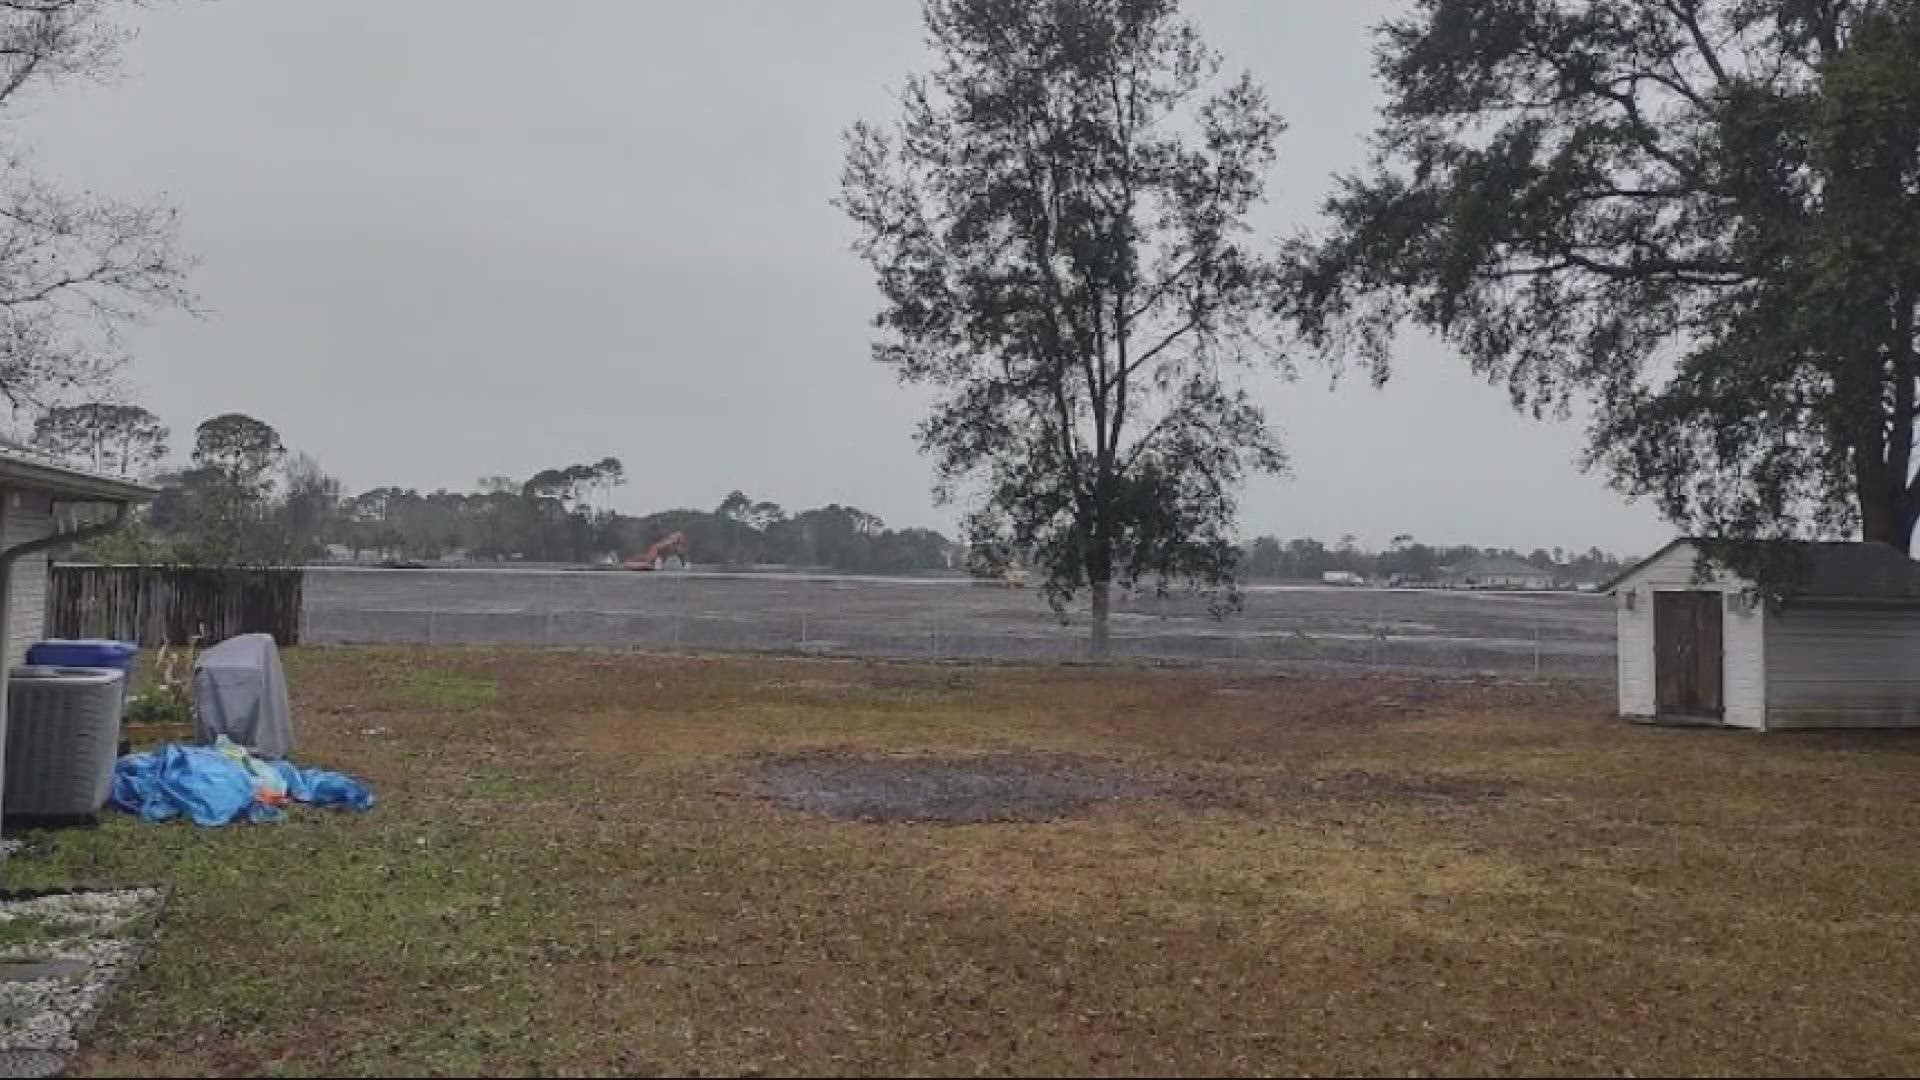 Residents in the area are frustrated by the amount of land cleared by the company.